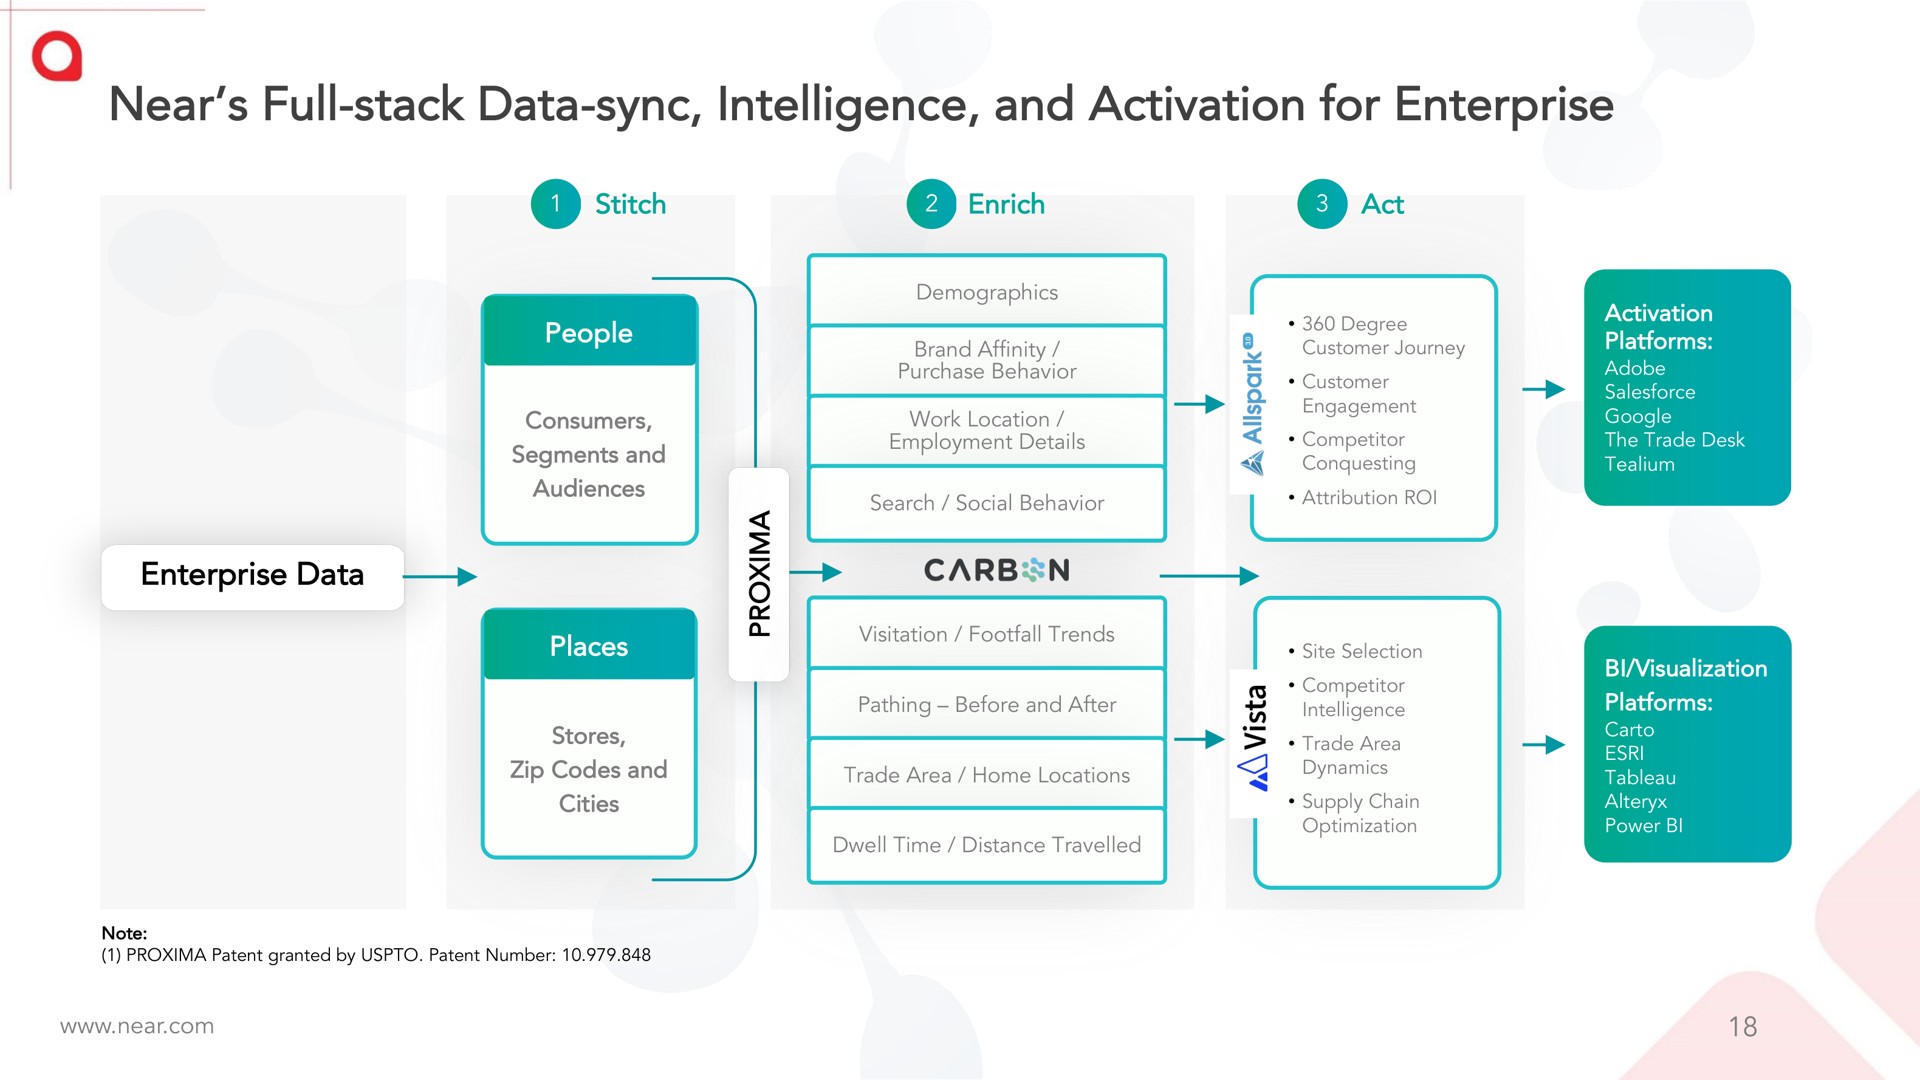 near full stack data sync intelligence and activation for enterprise enrich a | Near